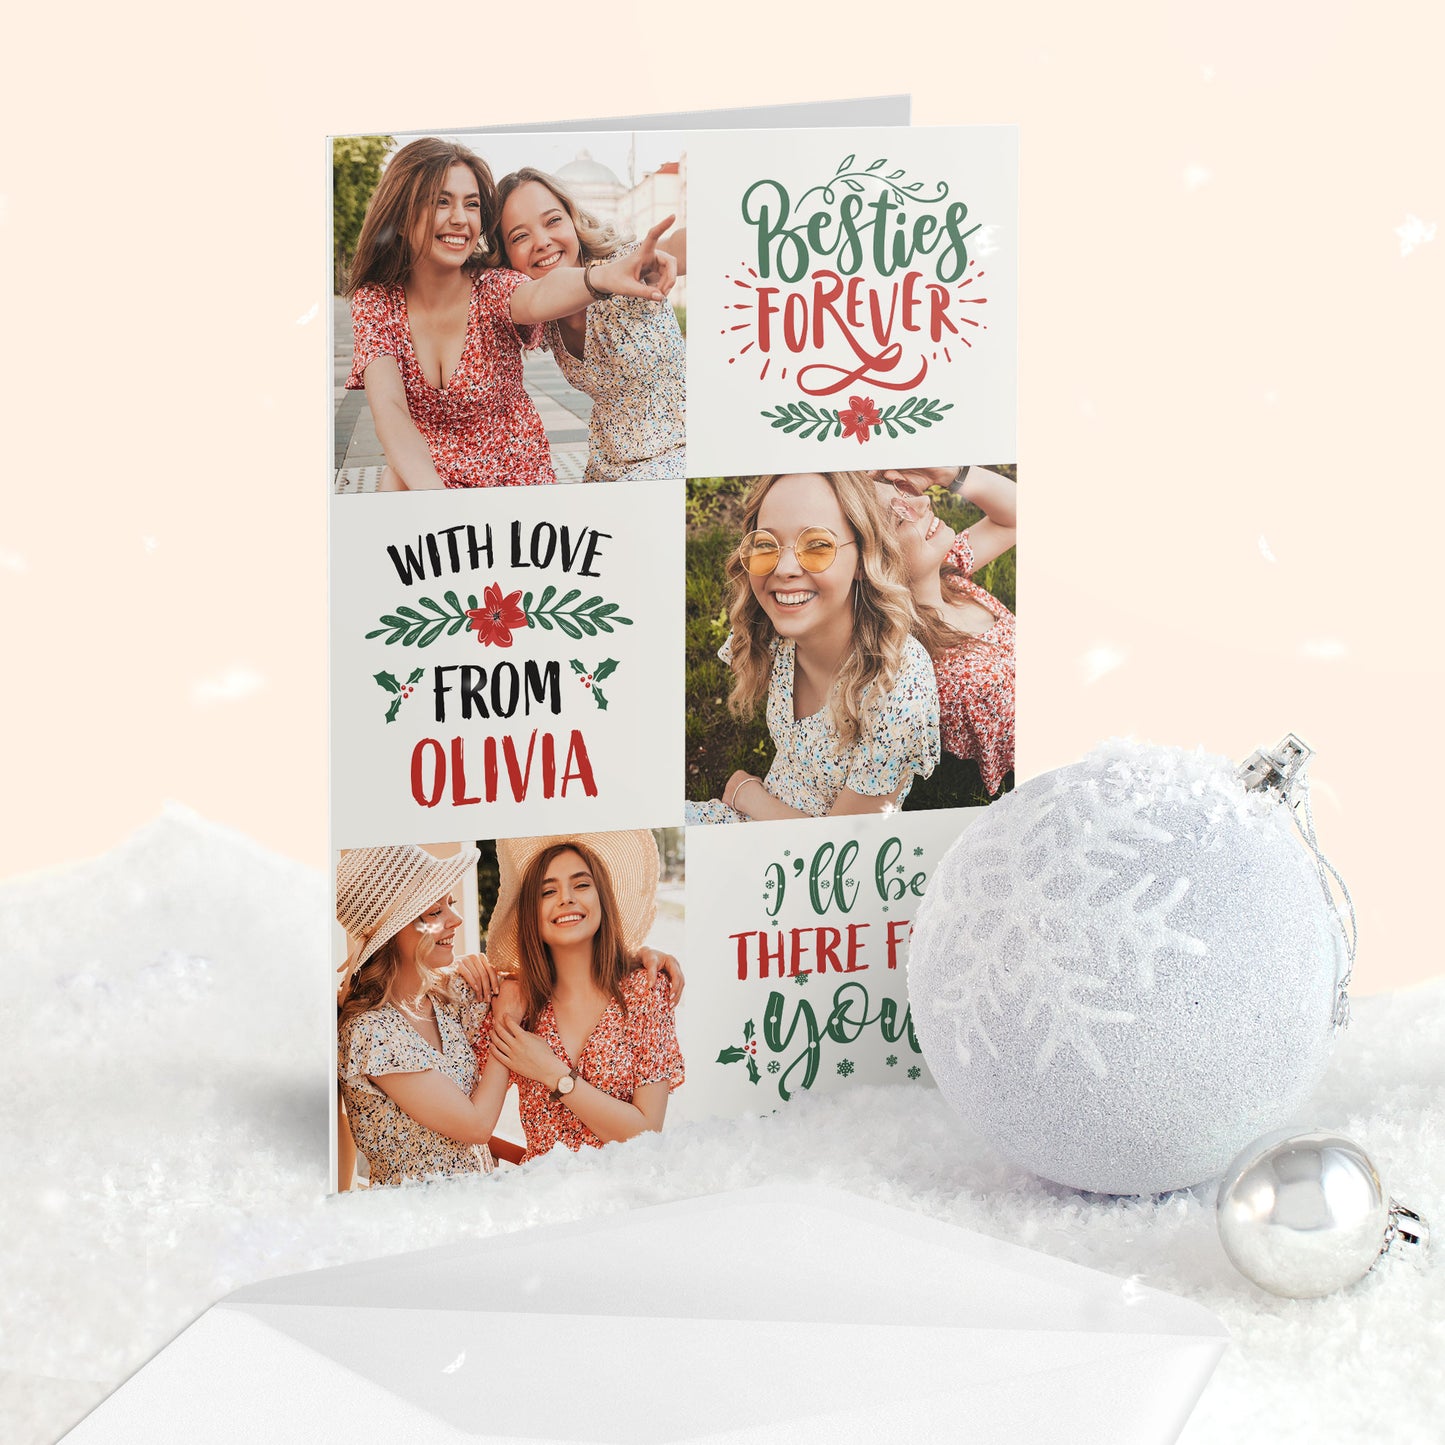 Sending Hugs And Love To You This Christmas - Personalized Folded Card - Christmas Gift For Besties, Friends, BFF